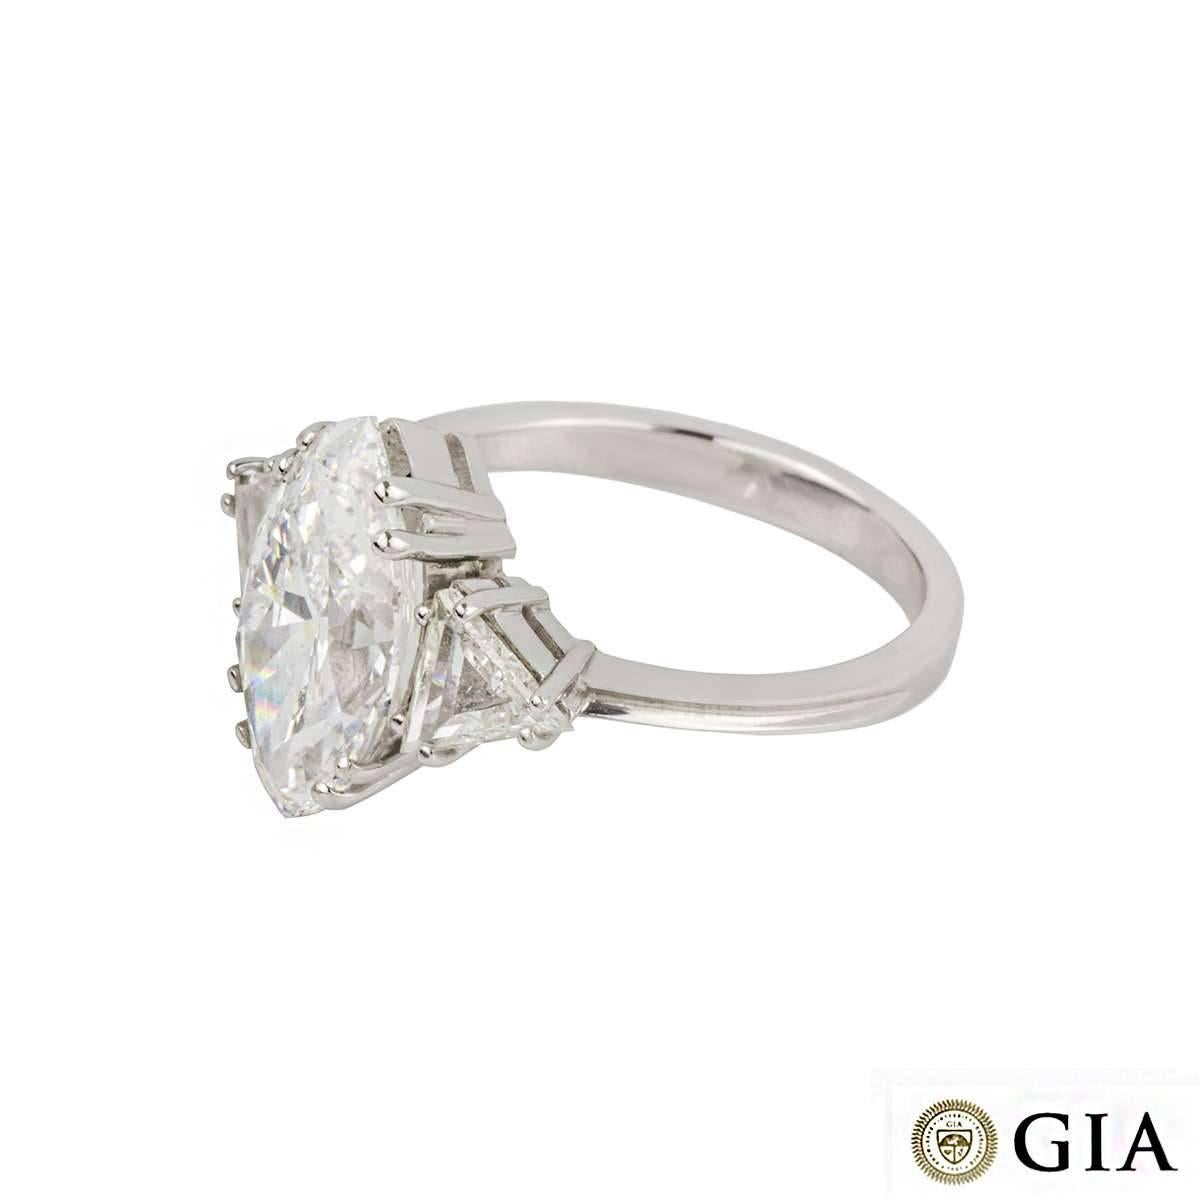 An magnificent diamond ring in 18k white gold. The central marquise cut diamond weighs 3.42ct, is D colour and VVS2 in clarity. The diamond is flanked by two triangular cut diamonds totalling approximately 0.80ct. The ring is currently a UK size N,